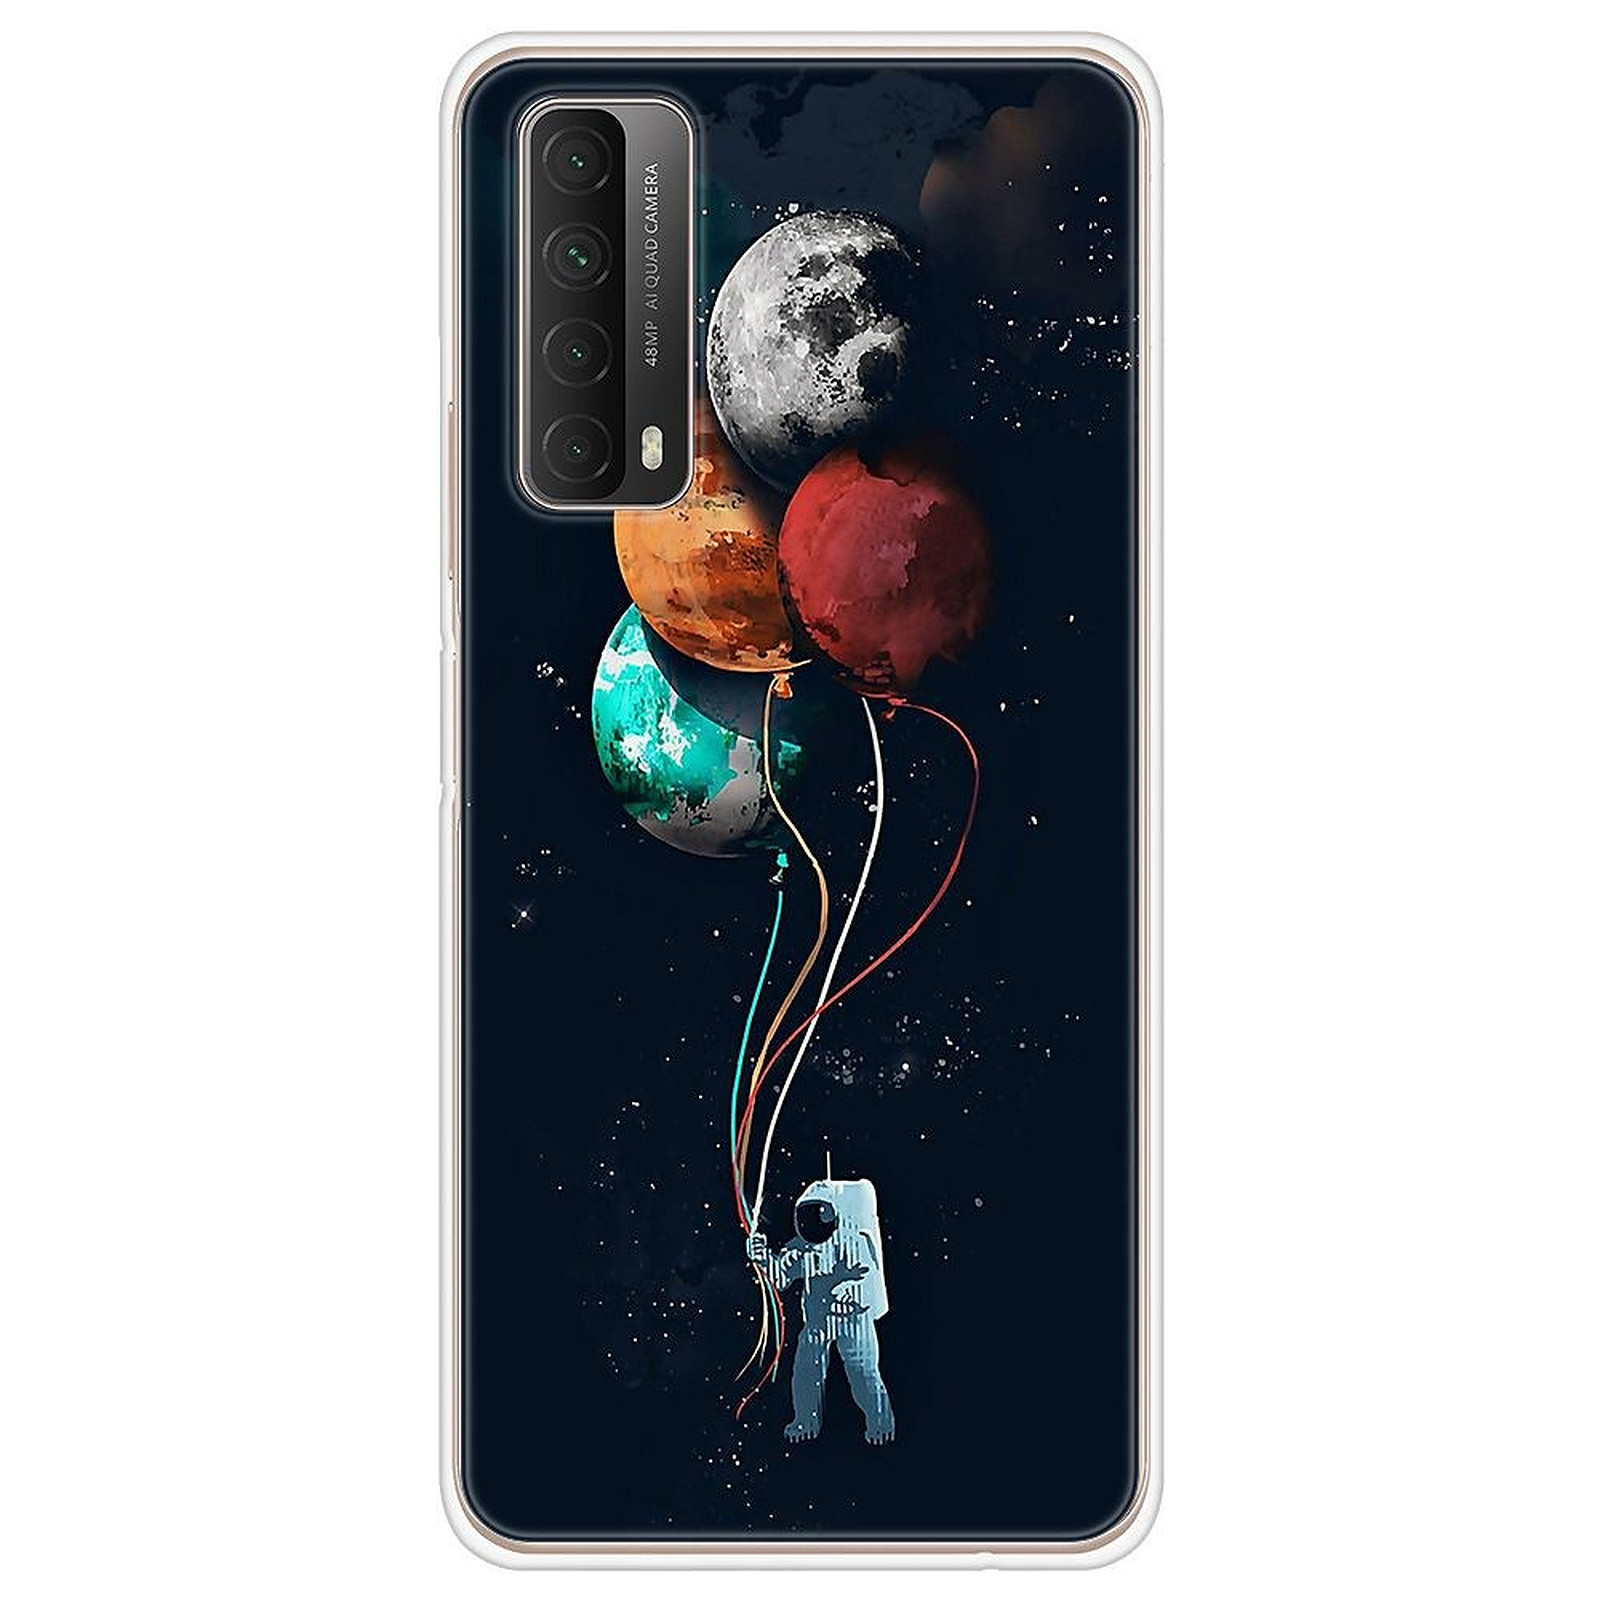 1001 Coques Coque silicone gel Huawei P Smart 2021 motif Cosmonaute aux Ballons - Coque telephone 1001Coques